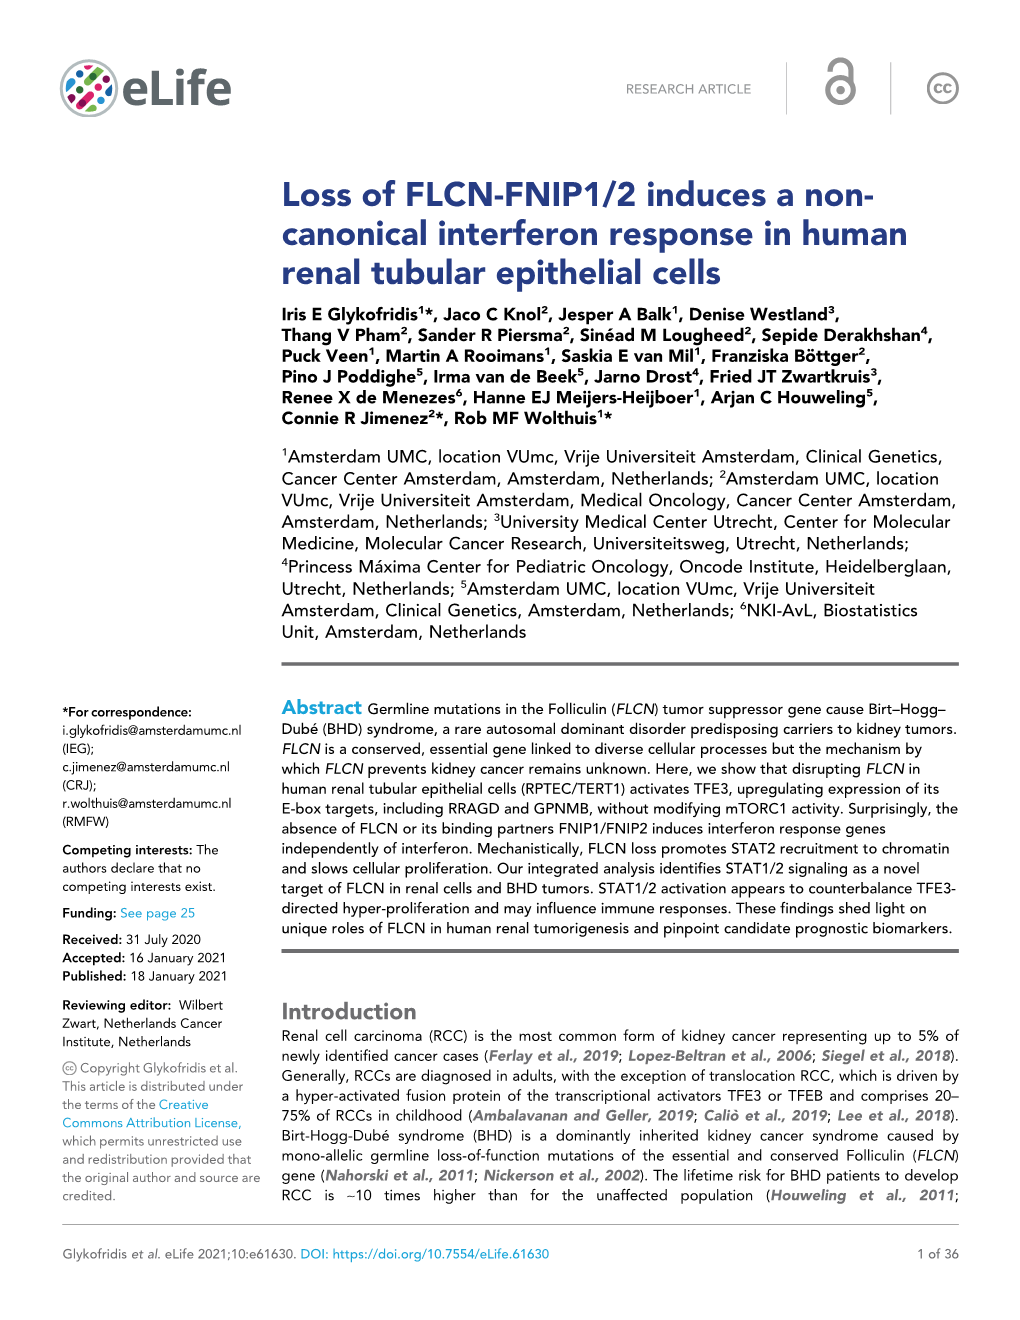 Loss of FLCN-FNIP1/2 Induces a Non- Canonical Interferon Response In